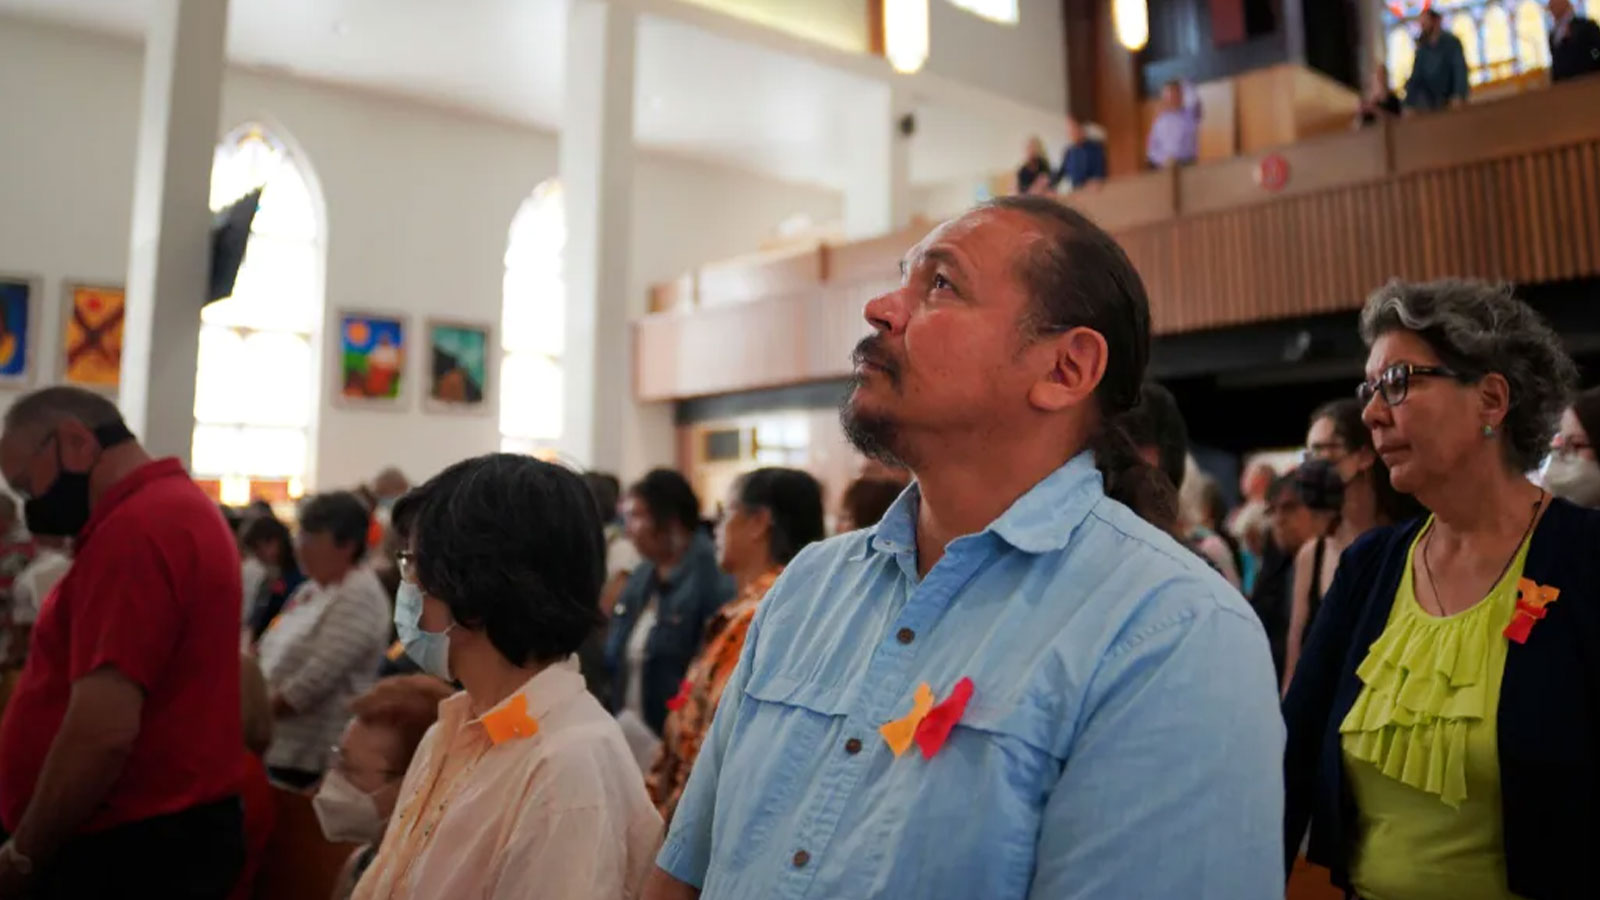 Parishioners attend the rededication ceremony of Sacred Heart Church of the First Peoples in Edmonton. The church was damaged in a fire but has been renovated ahead of Pope Francis's visit to Alberta. 